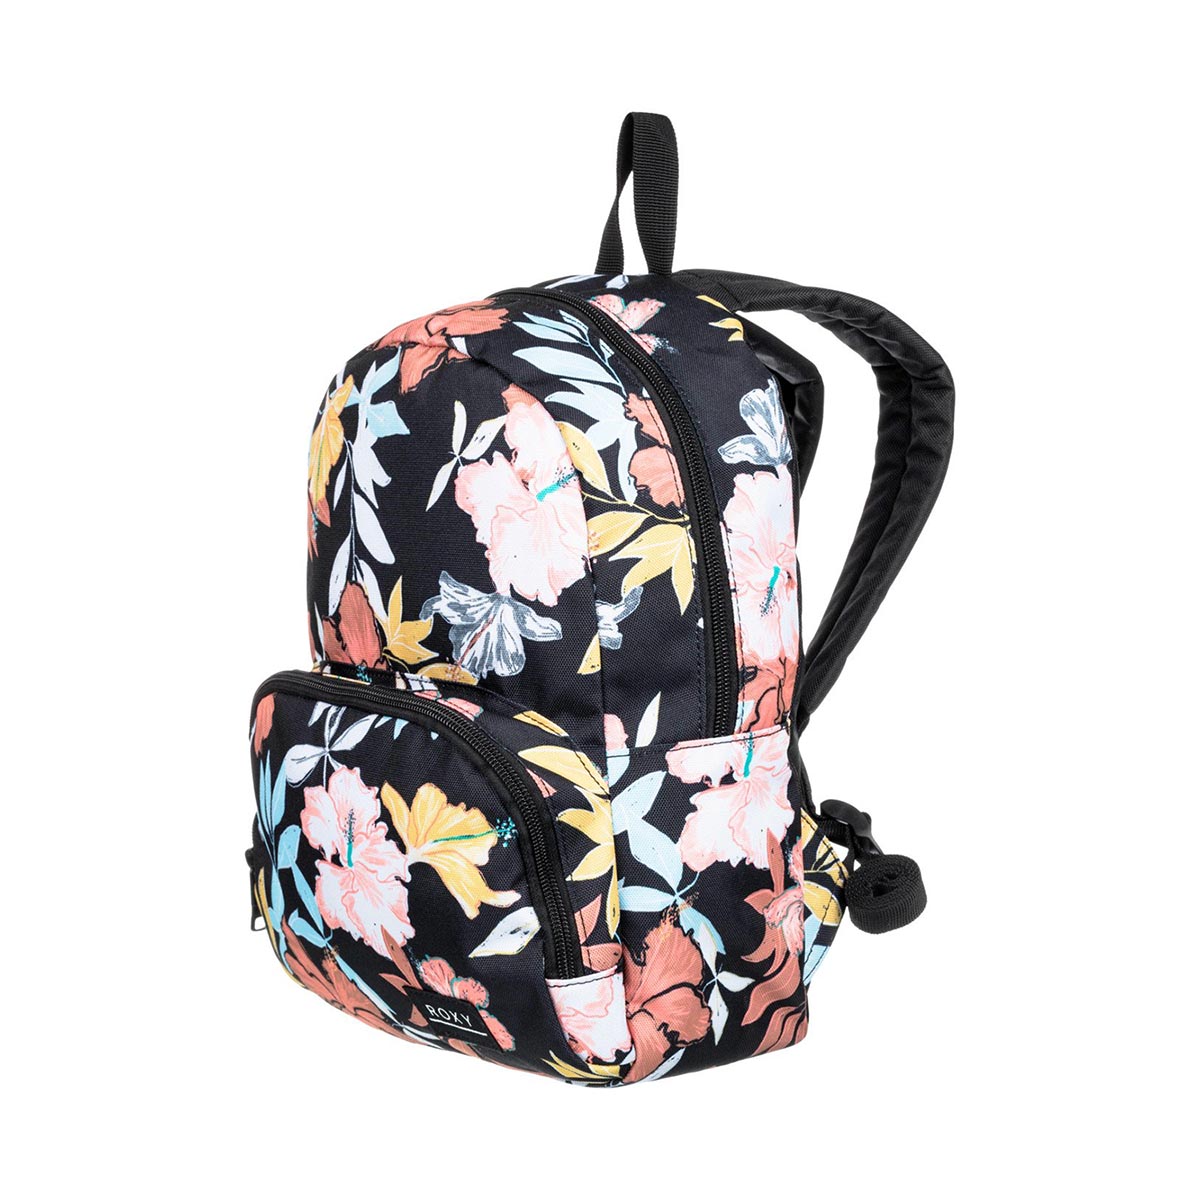 ROXY - ALWAYS CORE PRINTED EXTRA SMALL BACKPACK 8 L